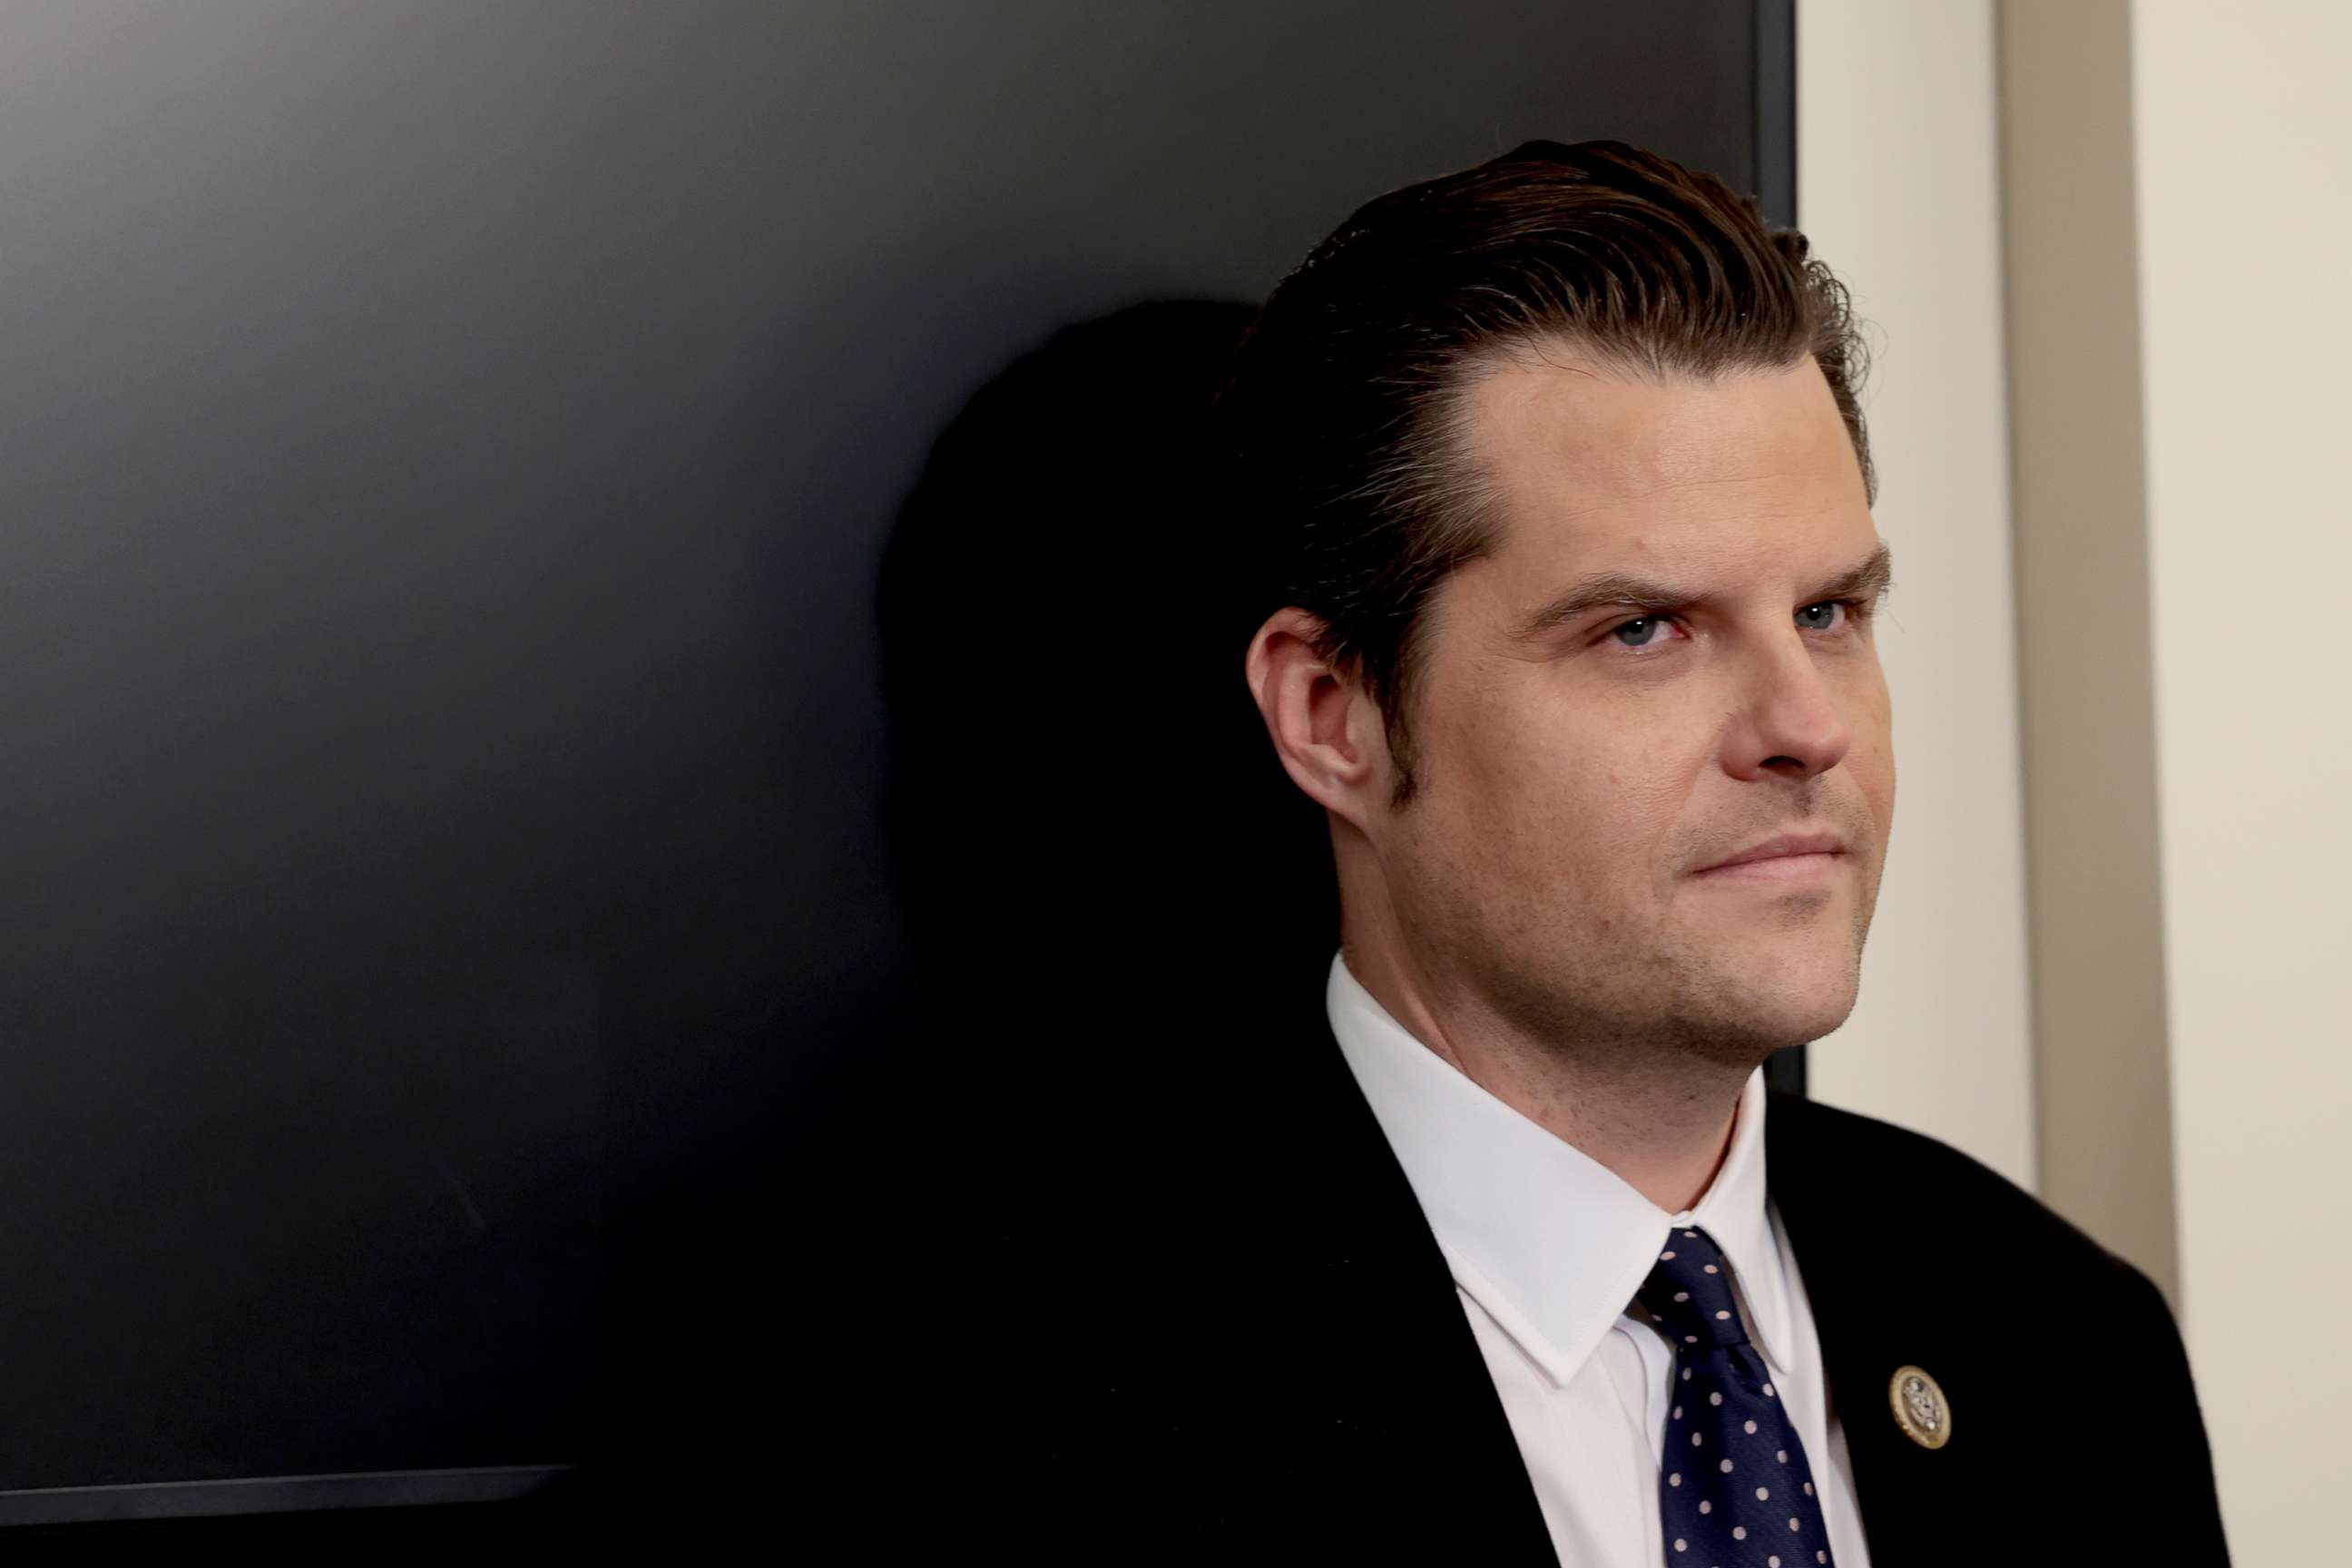 PHOTO: Rep. Matt Gaetz speaks at a news conference on Republican lawmakers' response to the anniversary of the January 6th protest, Jan. 6, 2022, in Washington, D.C. 